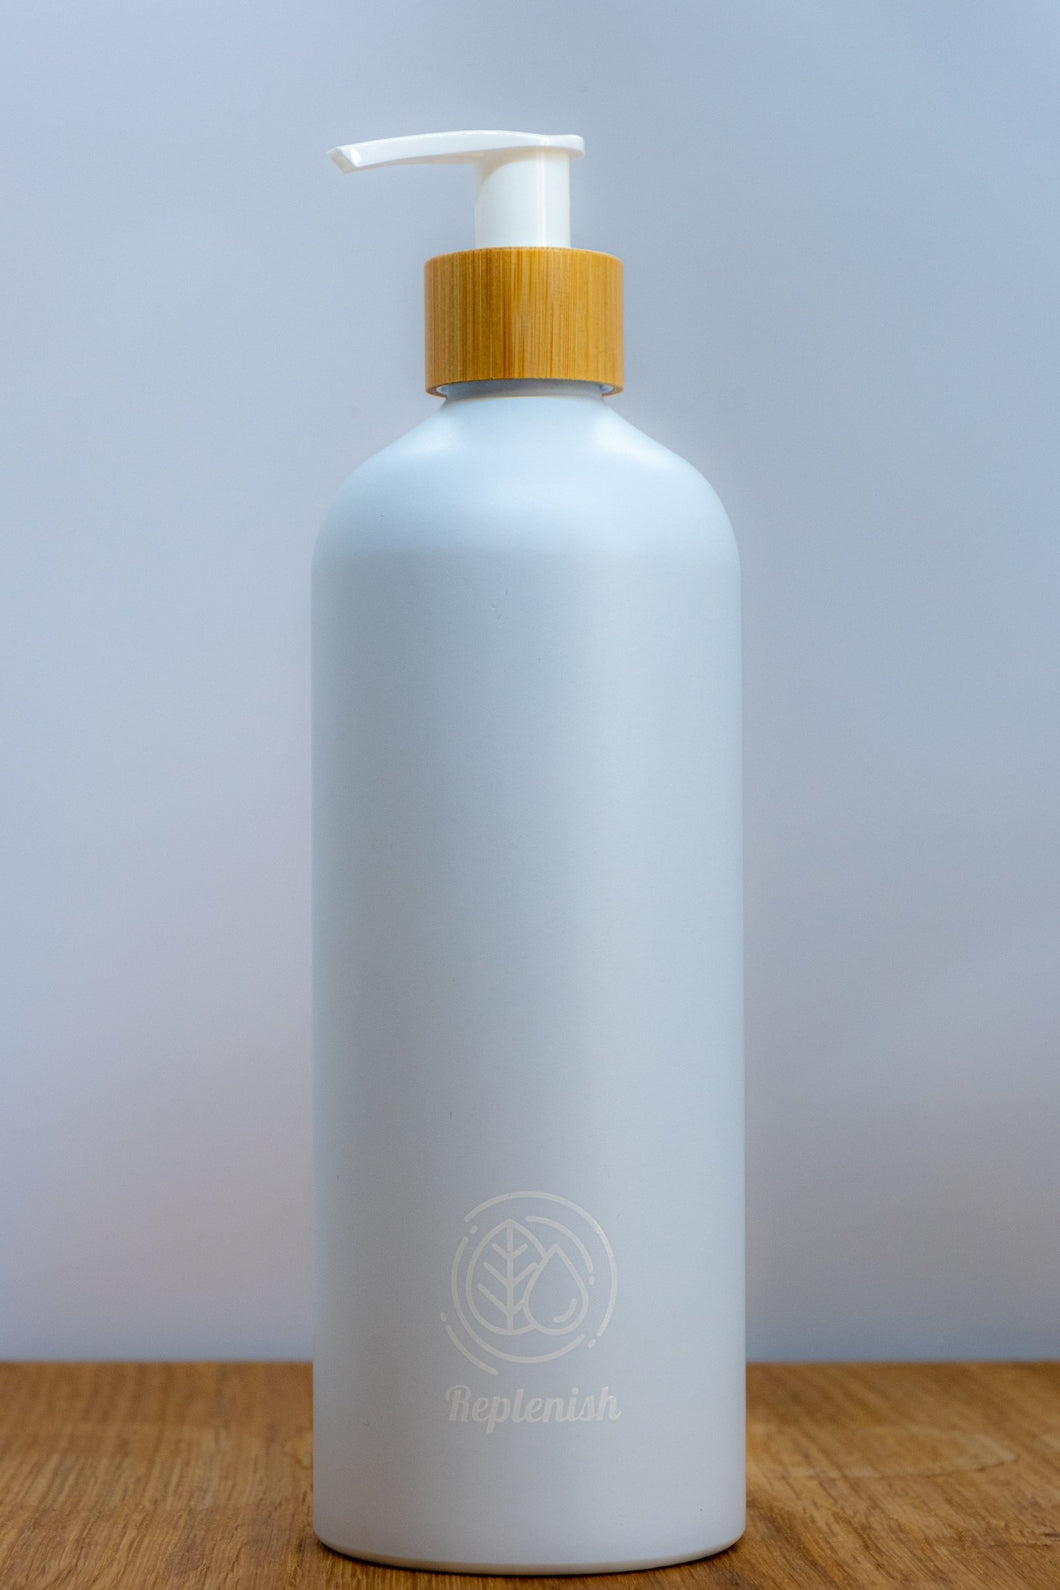 Replenish Bottle with Bamboo Lotion Pump filled with 500ml of Miniml Cleaning Product